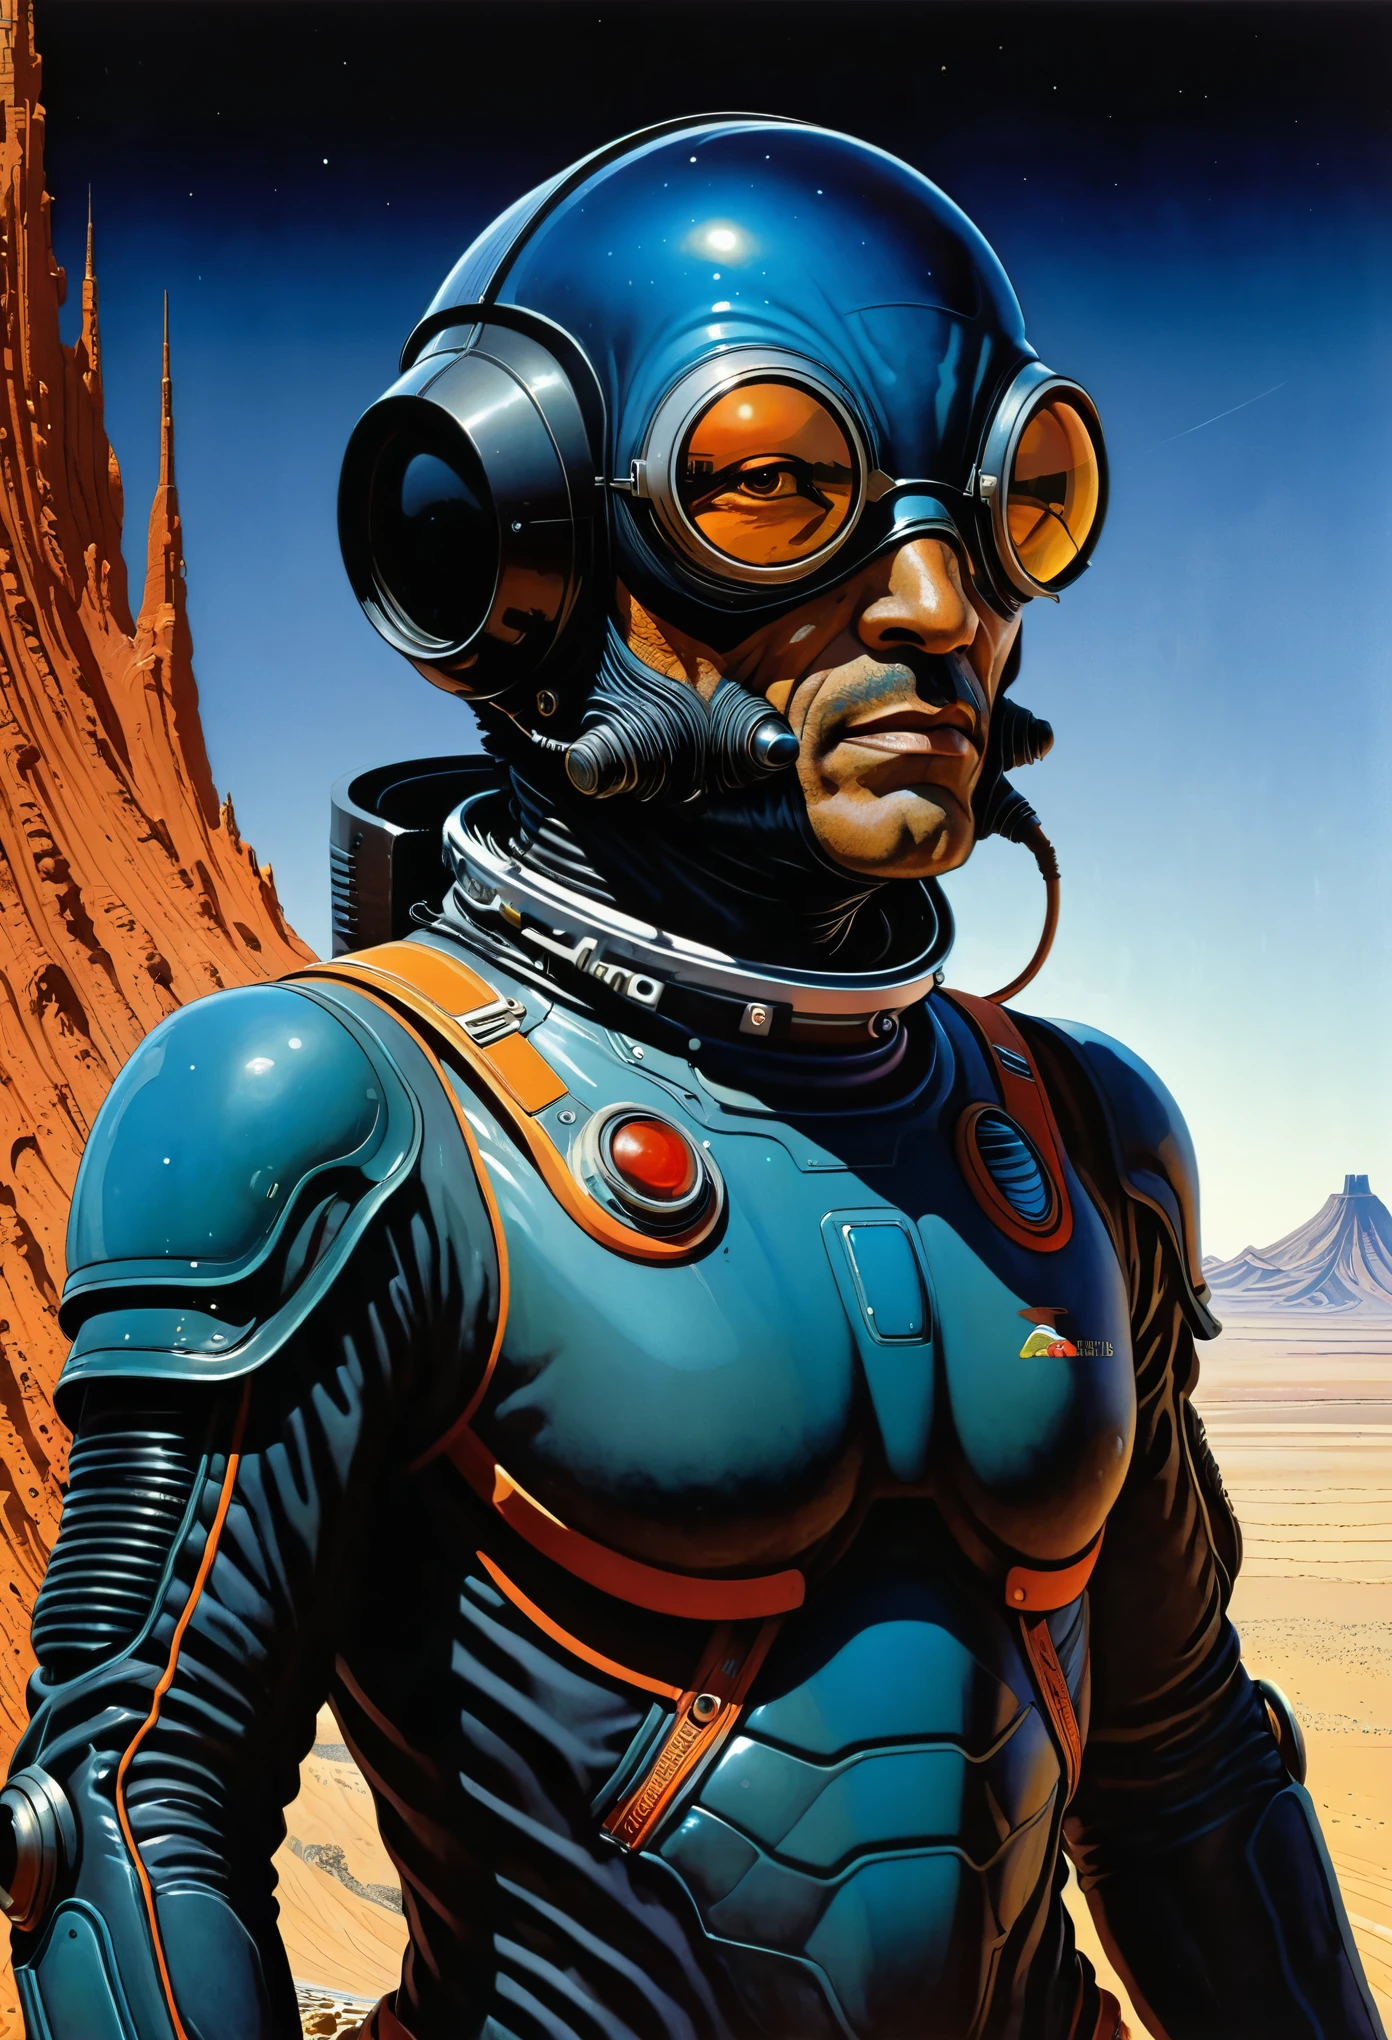 Moebius Style (Jean Giraud) - Painting by Jean Giraud Moebius, ((masterpiece)), ((best quality)), (masterpiece, highest quality), portrait of an insectoid cosmonaut with shiny black scaly skin, in a space suit, with a frown, shiny black scaly skin, intricate complexity, surreal horror, a dynamic scene, streaks of paint, a trend in art. station, photoreality, 8K, octane, Greg Rutkowski rendering, full-length body, dynamic Mobius face style